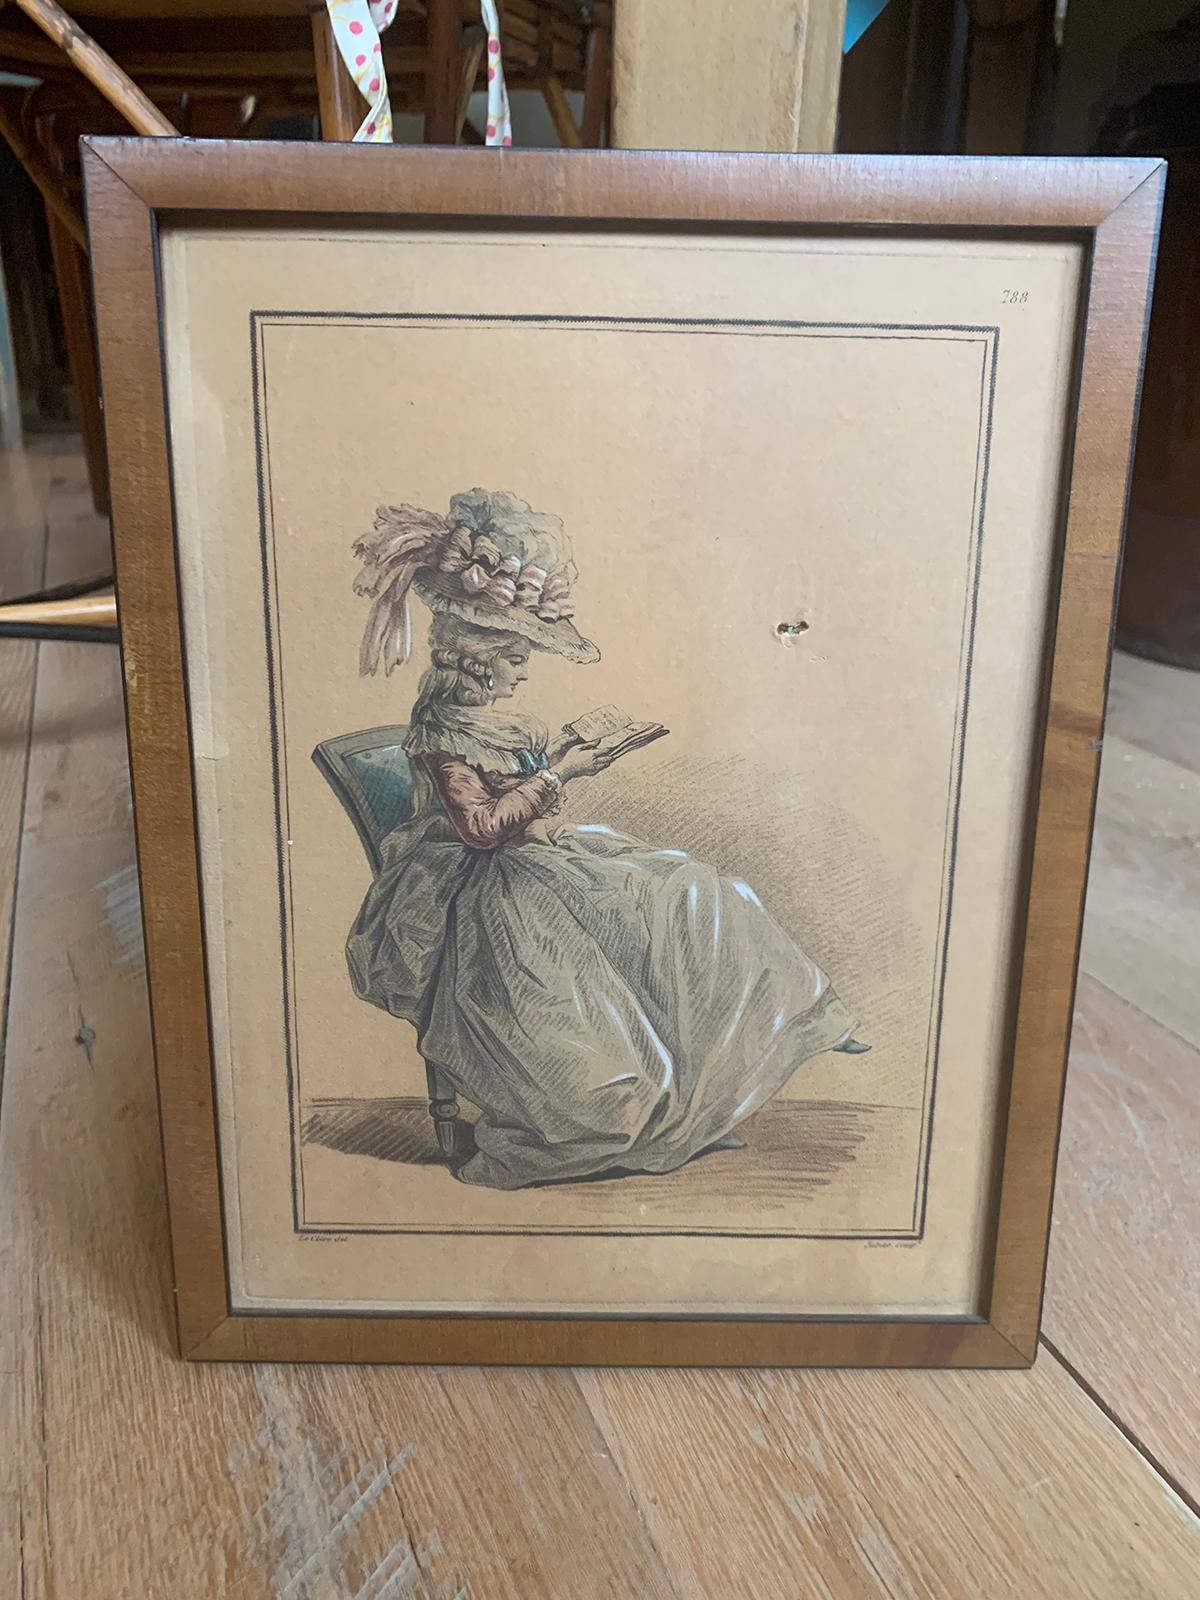 18th century circa 1760-1781 French aquatint engraving of woman reading by C.L. Jubier after original painting by Le Clere.